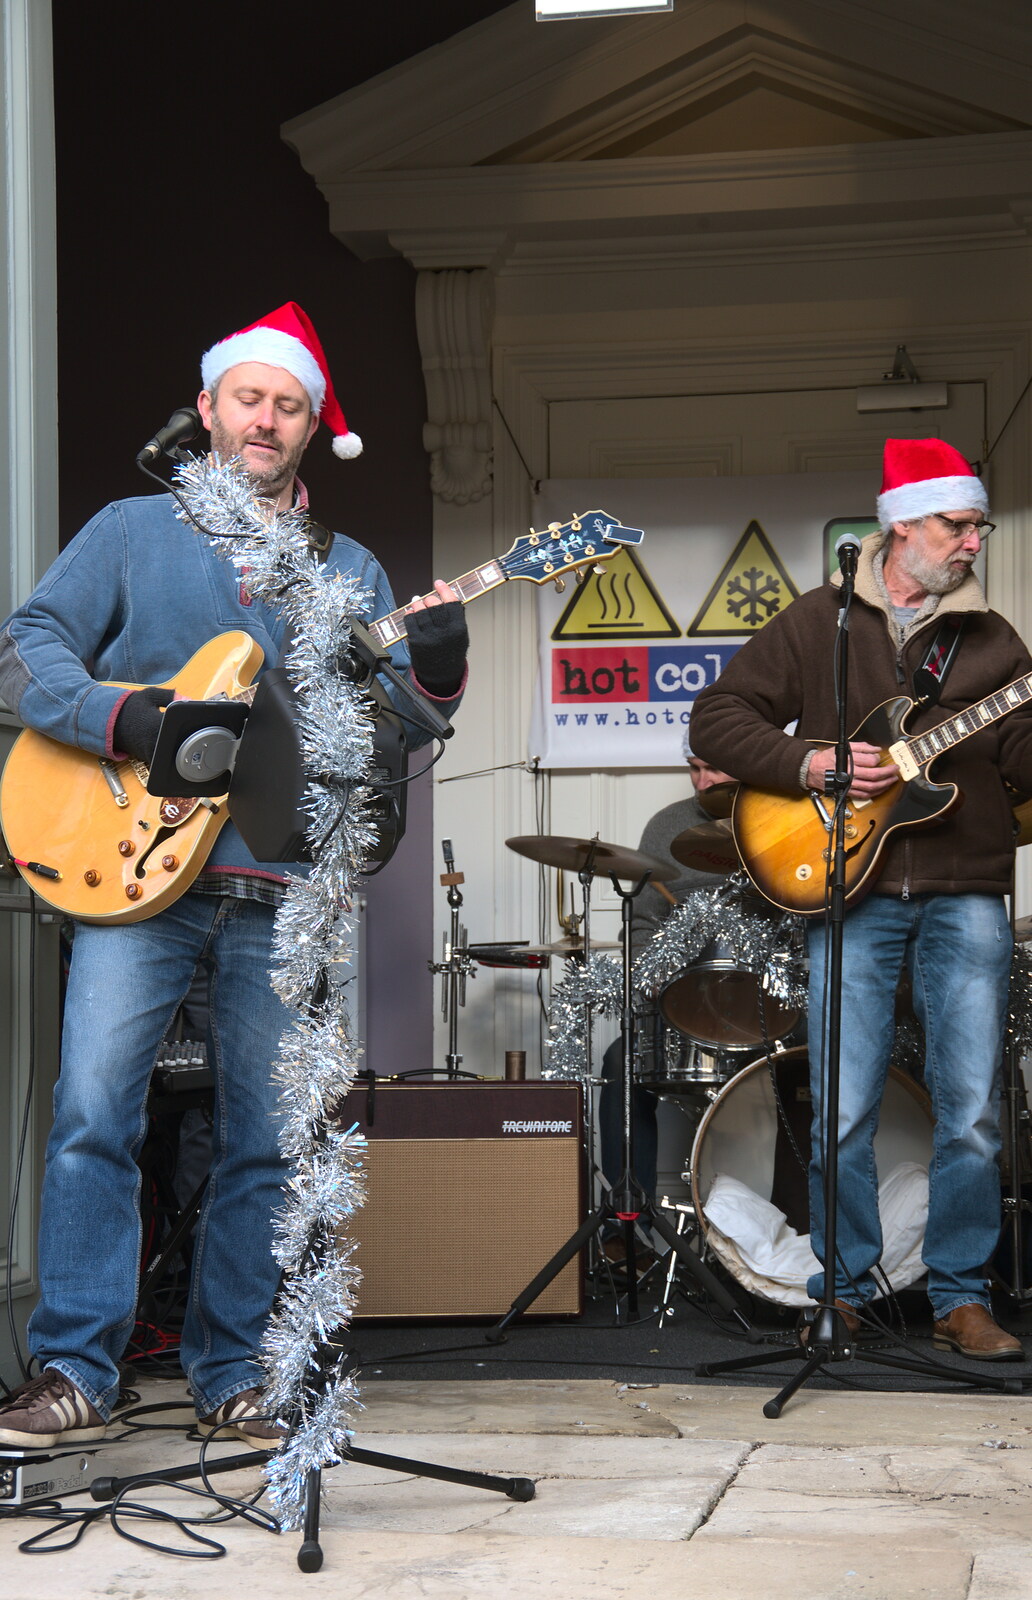 Hot Cold Ground blues band are still playing from The St. Nicholas Street Fayre, Diss, Norfolk - 9th December 2018